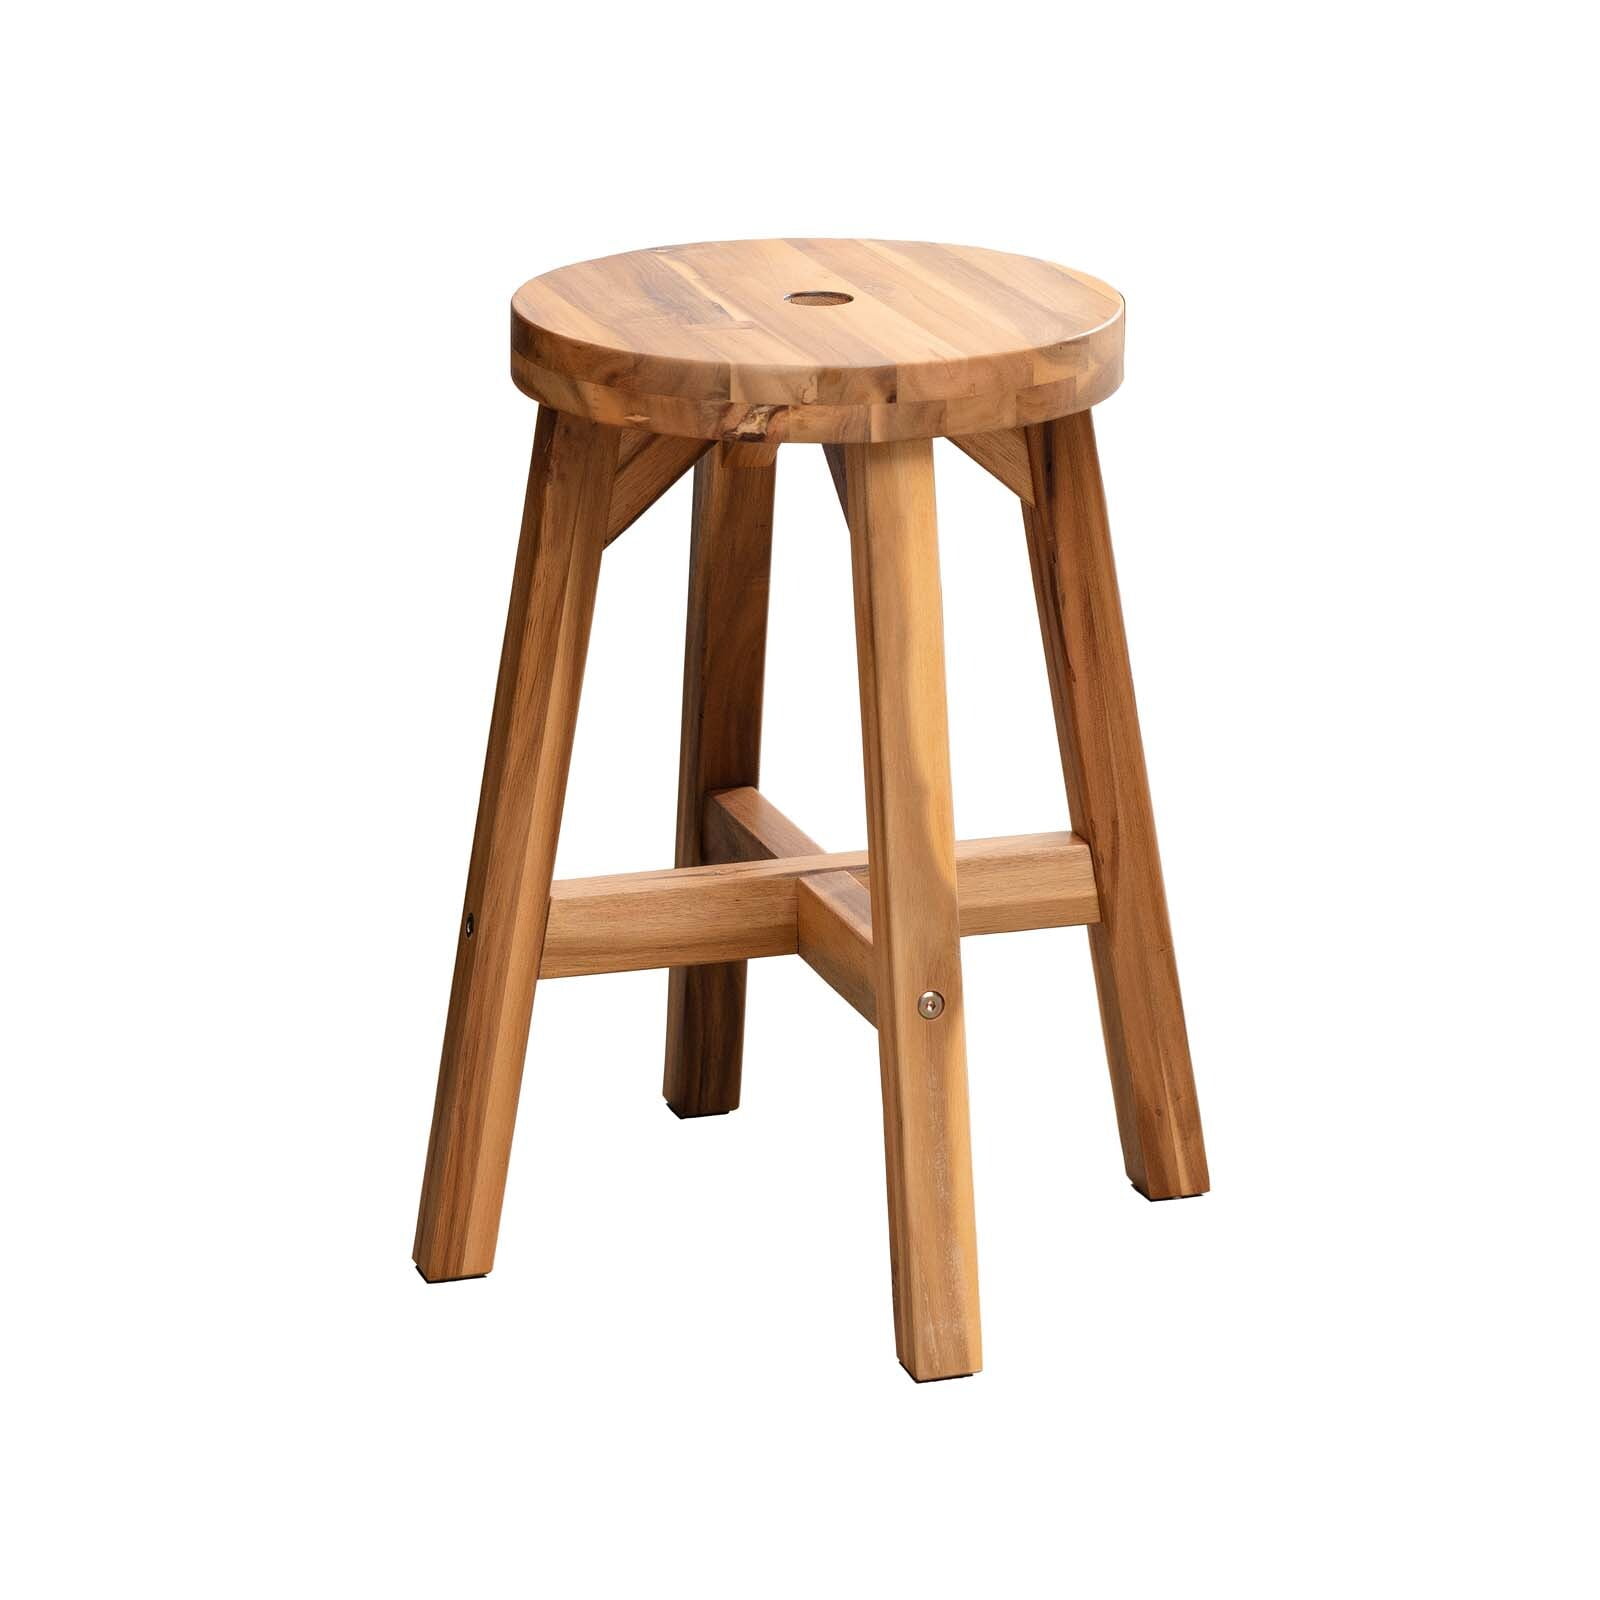 Wood Childrens Stool Chair 12 Dog Decals